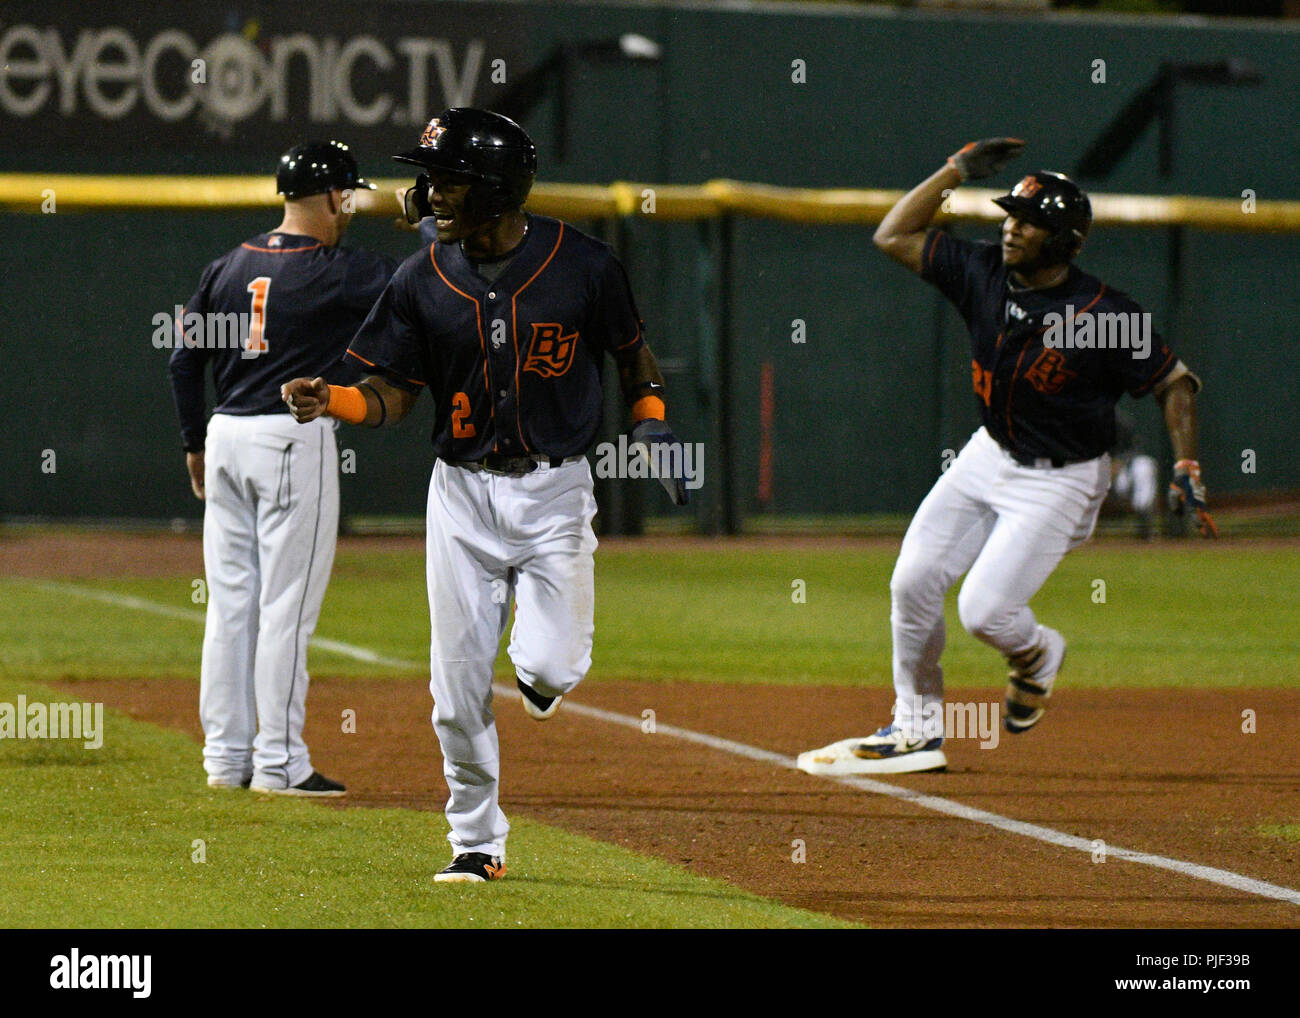 September 6, 2018; Bowling Green KY, USA Bowling Green Hot Rods second baseman Vidal Brujan (2) points to the bench after Bowling Green Hot Rods left fielder Moises Gomez (21) two run HR a Mid West League series between the Lansing Lugnuts and the Bowling Green Hot Rods in Bowling Green, KY st Bowling Green Ballpark. Hot Rods sweep Lugnuts and advance t round two. (Mandatory Photo Credit: Steve Roberts/CSM) Stock Photo